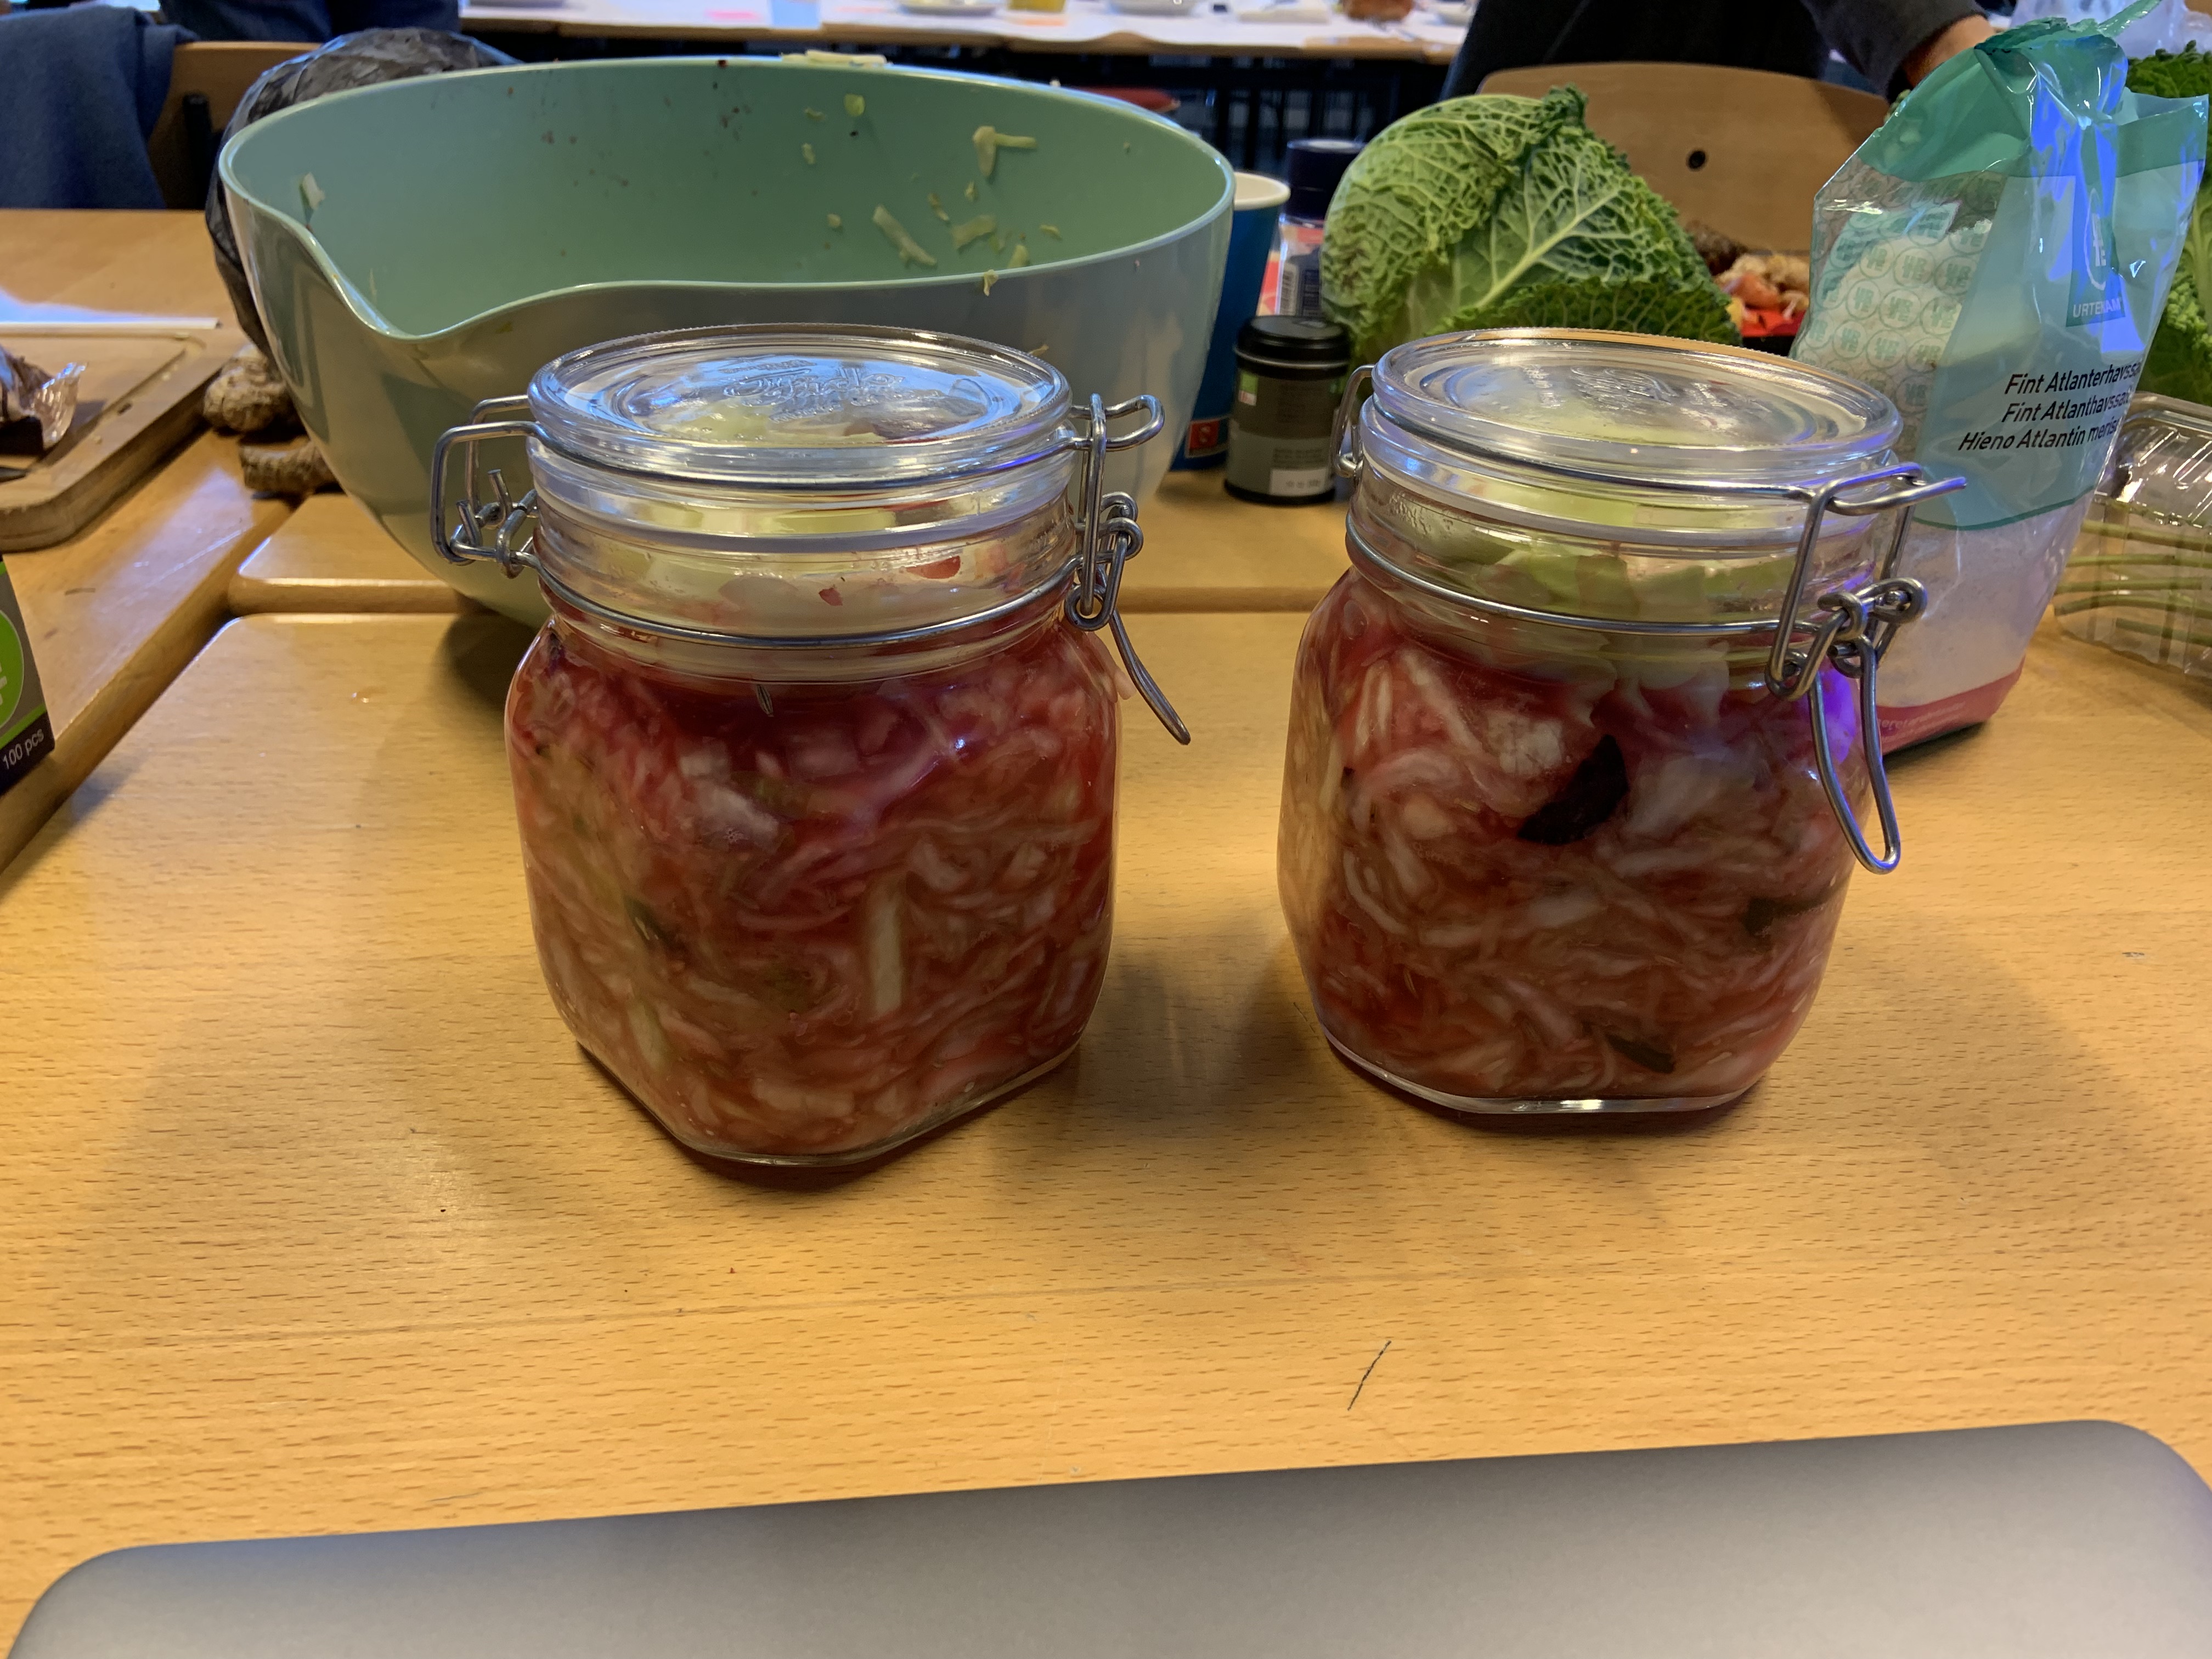 Shredded cabbage and beetroot fermenting products that have been put into two medium-sized jars for fermentation.